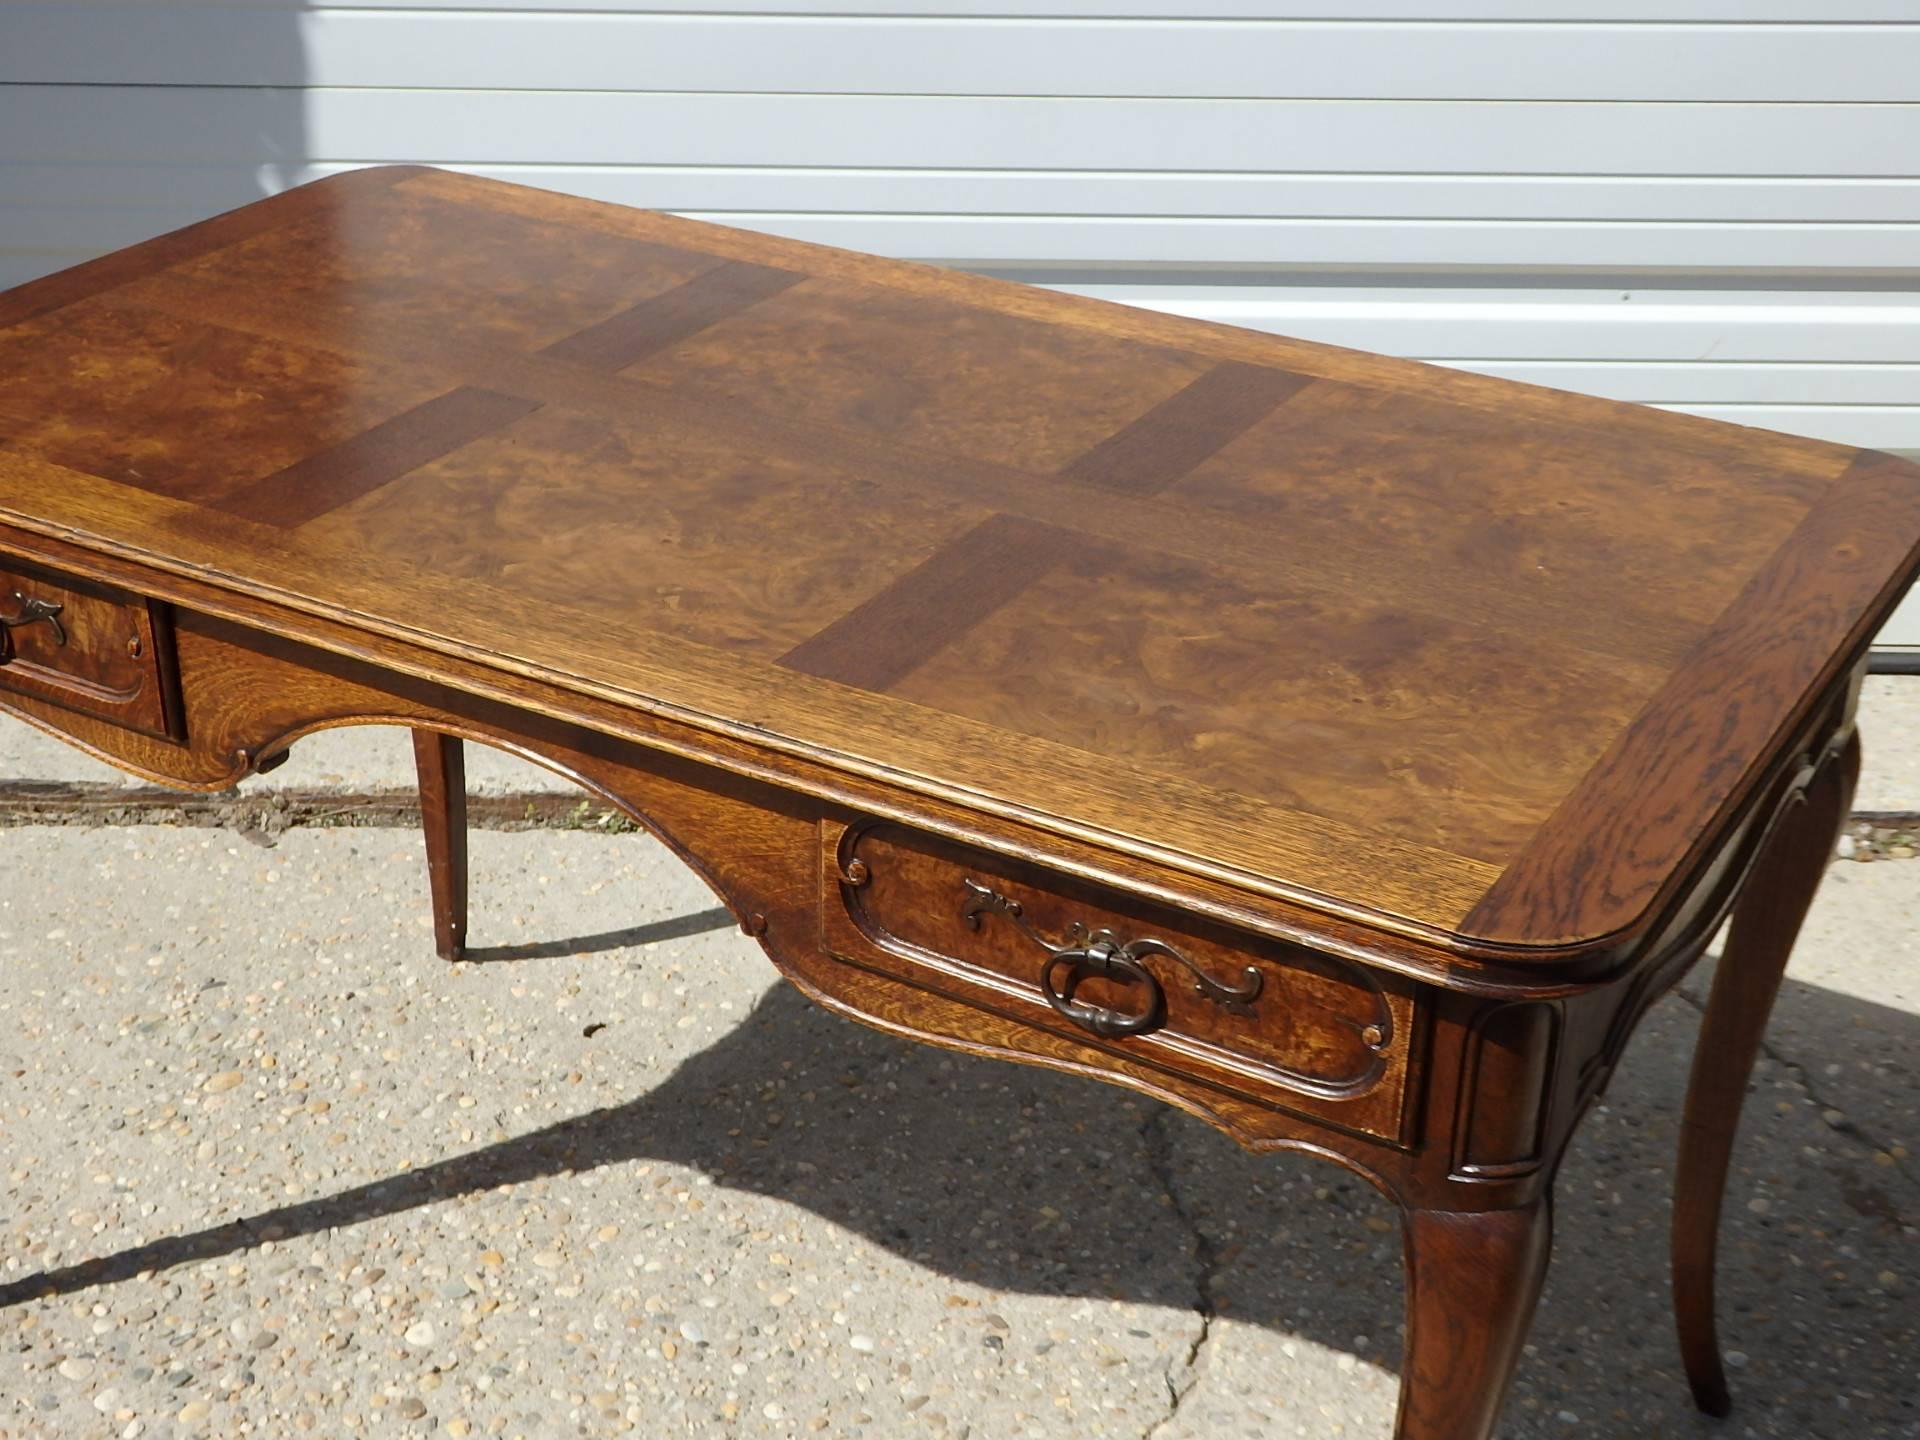 A charming ladies writing table, with two-hand carved drawers and old brass pulls. Cabriole legs, burl walnut top, walnut base, circa 1860.